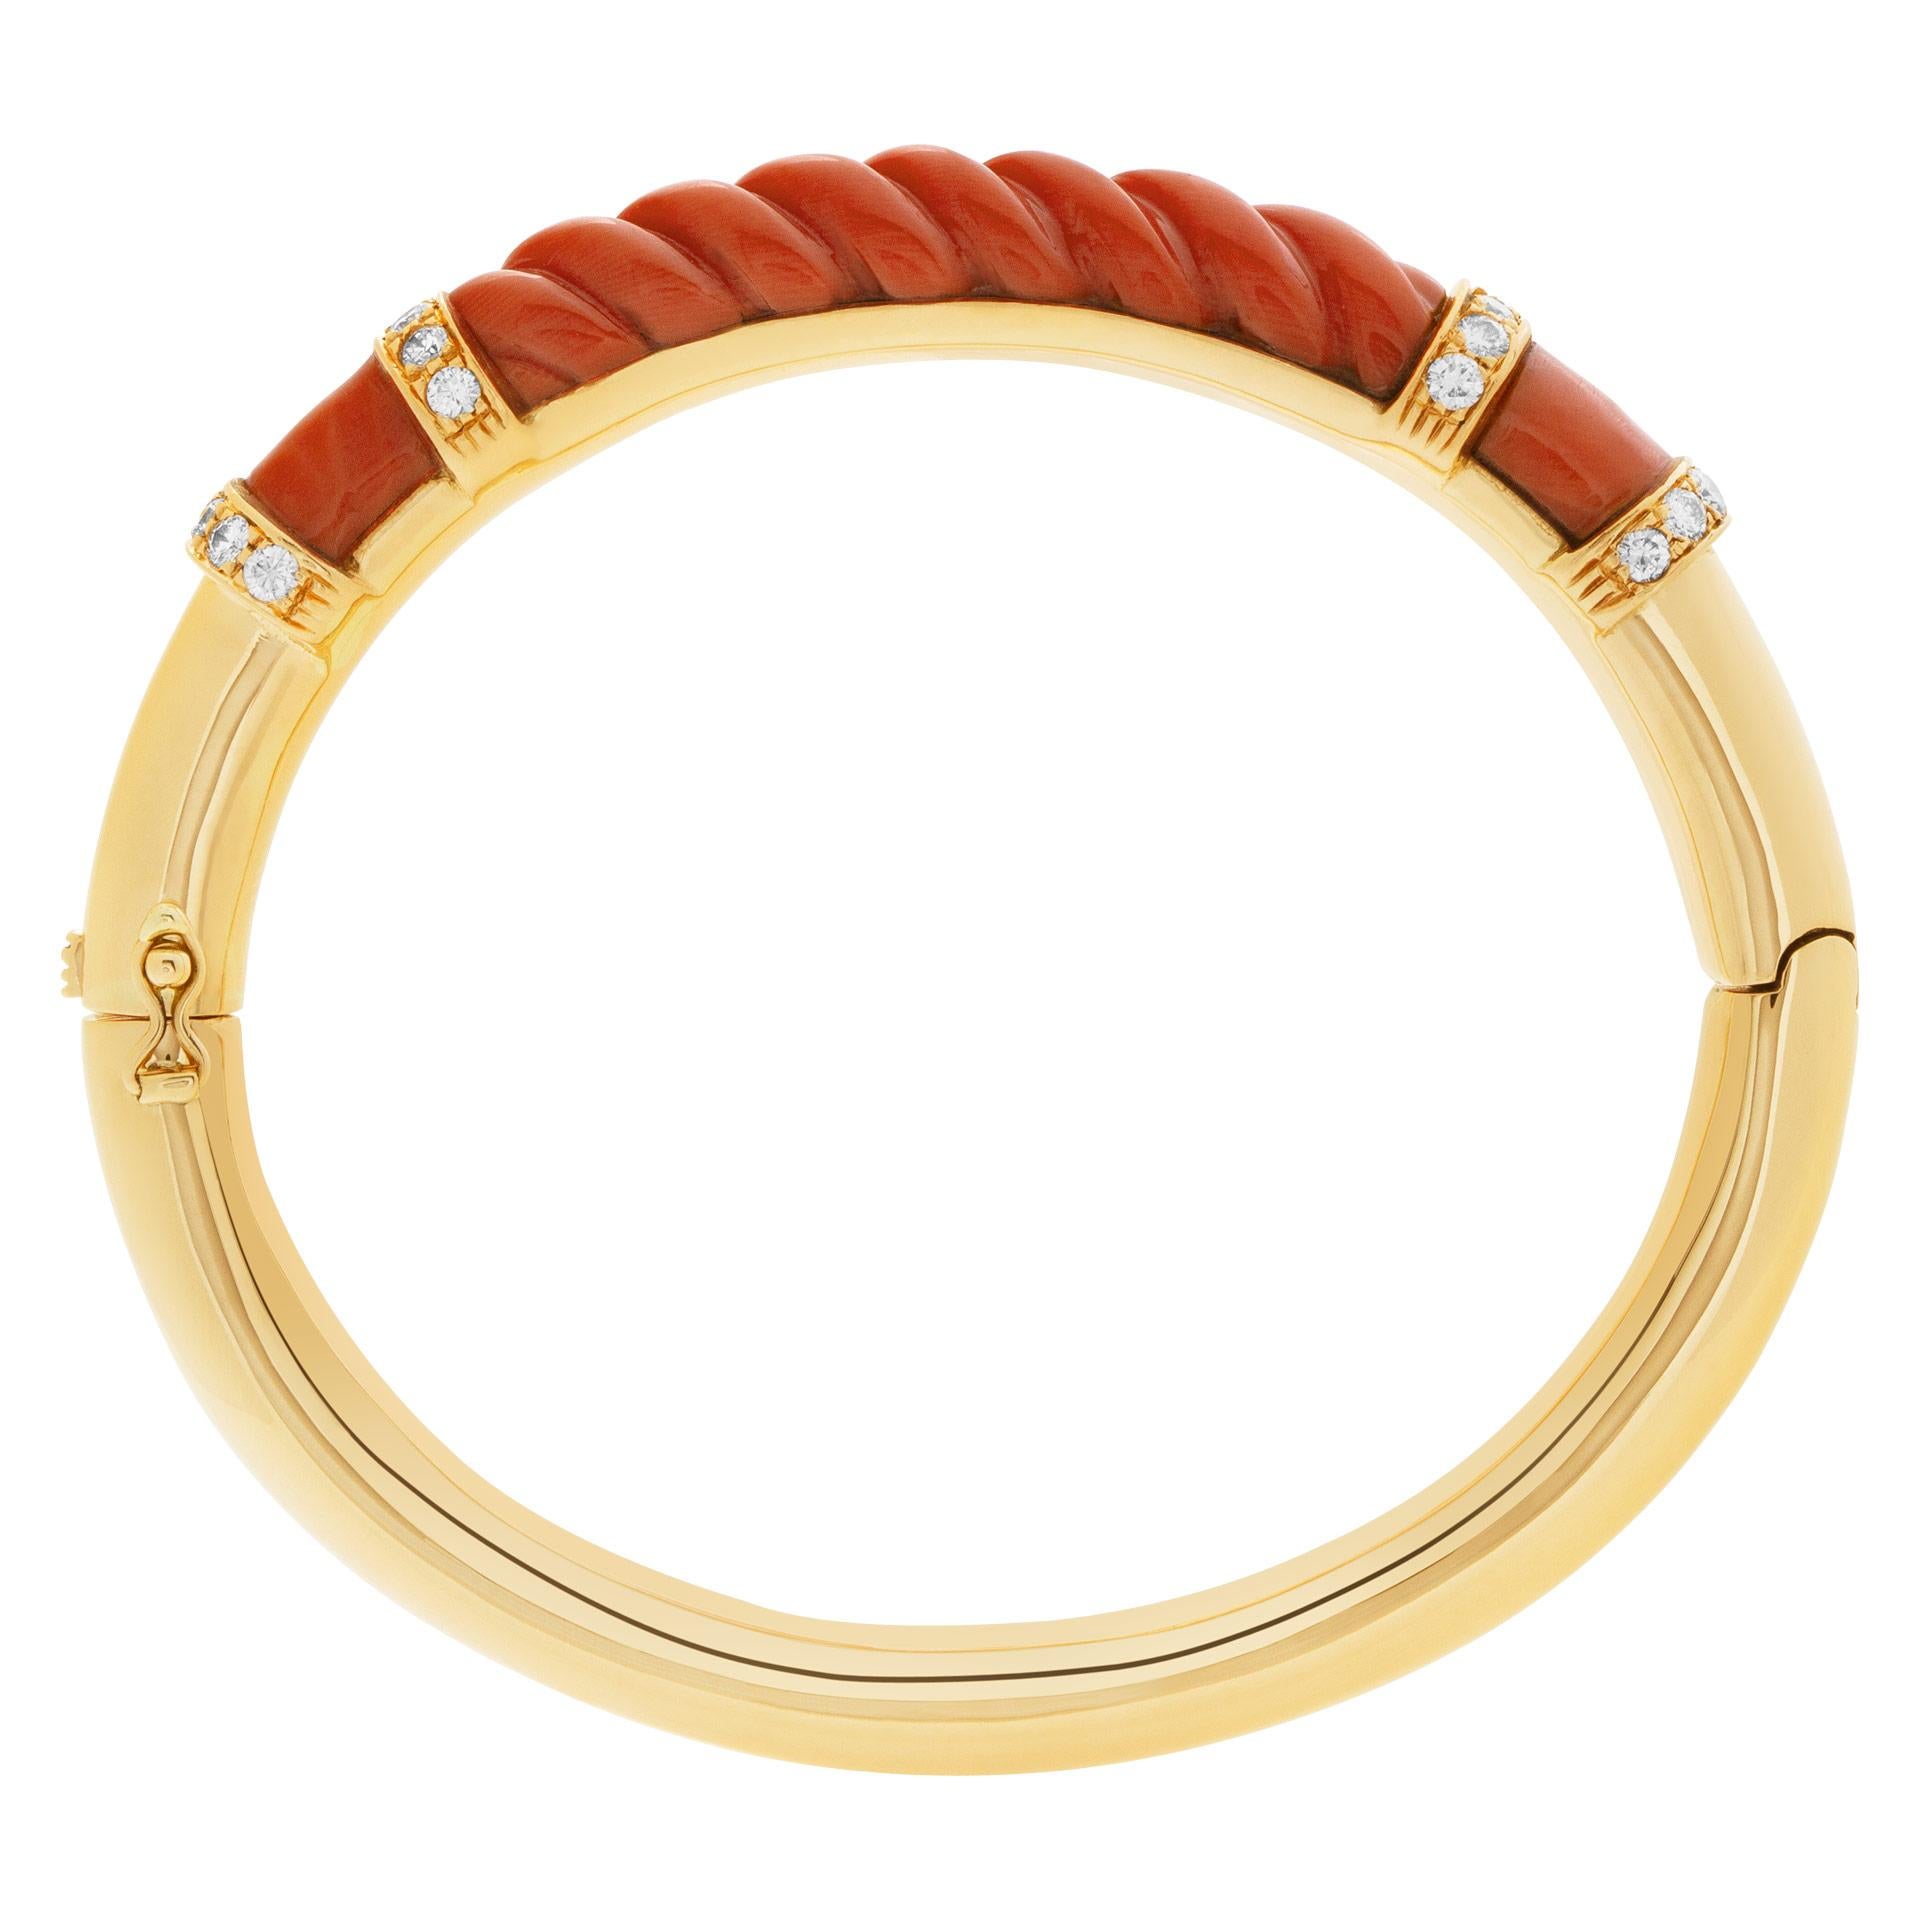 ESTIMATED RETAIL $5,500.00 - YOUR PRICE $3,700.00 - Bangle in 18k yellow gold with twisted 